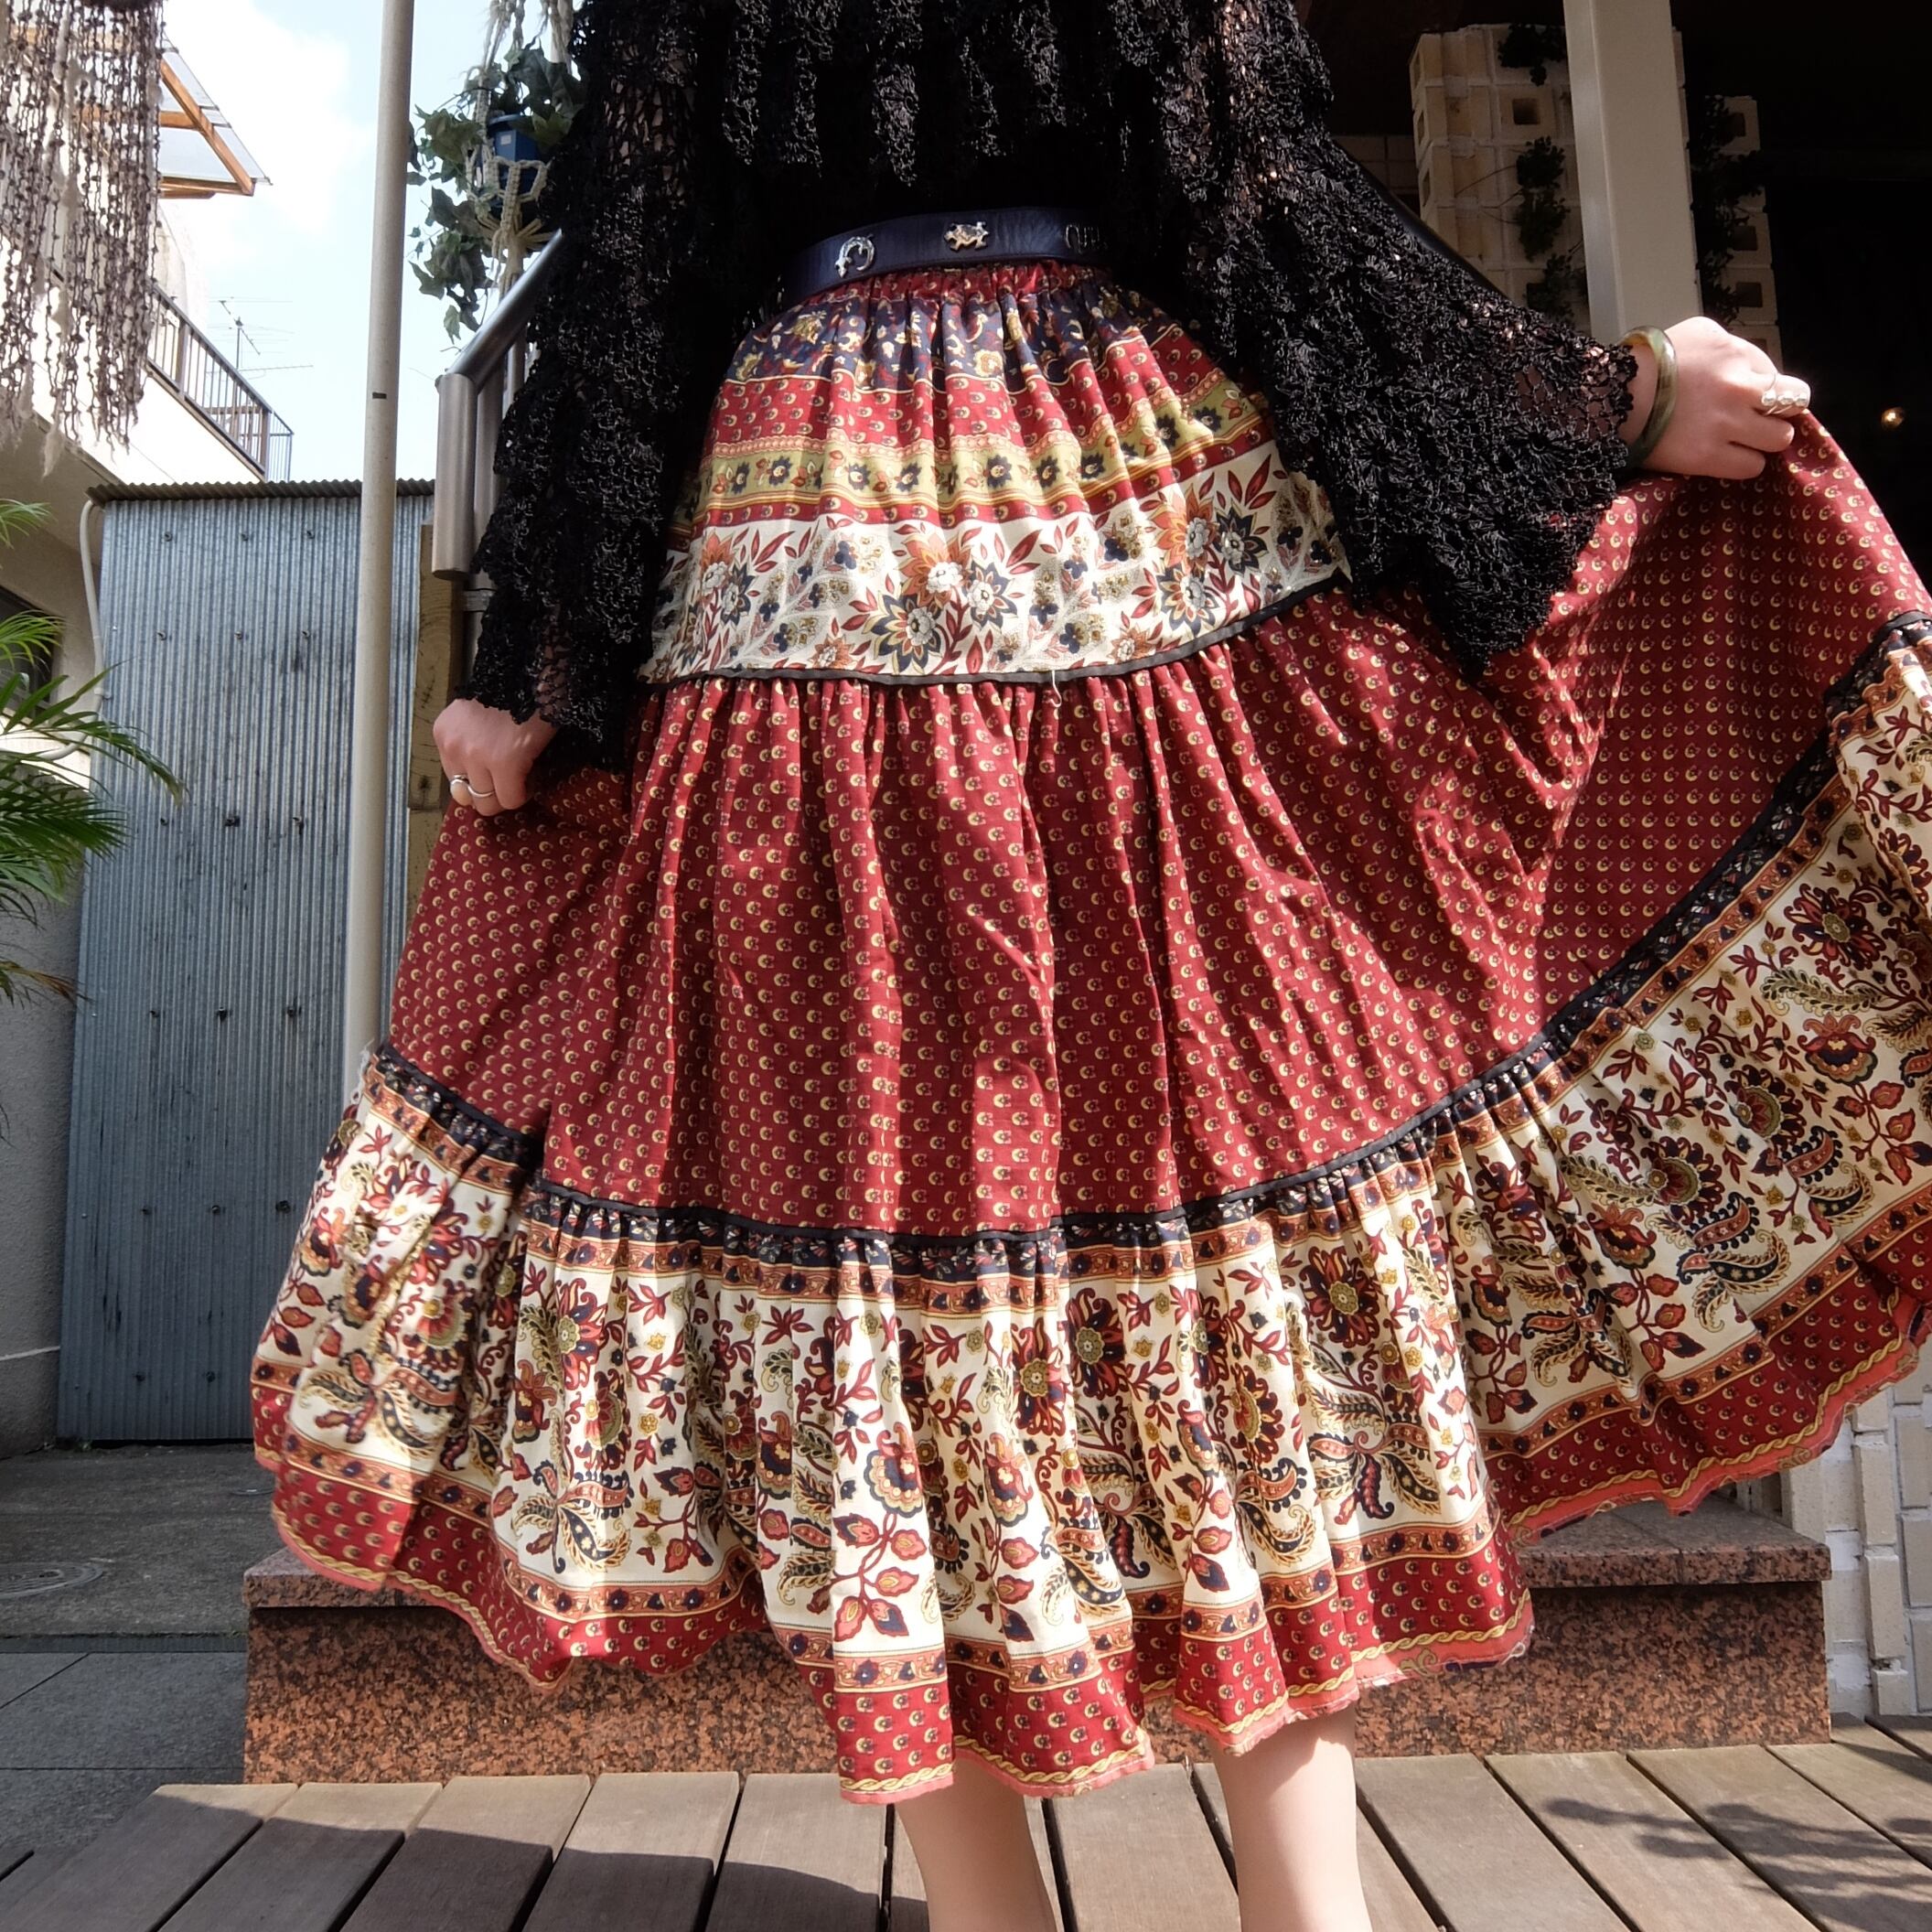 French vintage provence skirt／フランス製 プロヴァンス スカート | BIG TIME ｜ヴィンテージ 古着  BIGTIME（ビッグタイム） powered by BASE